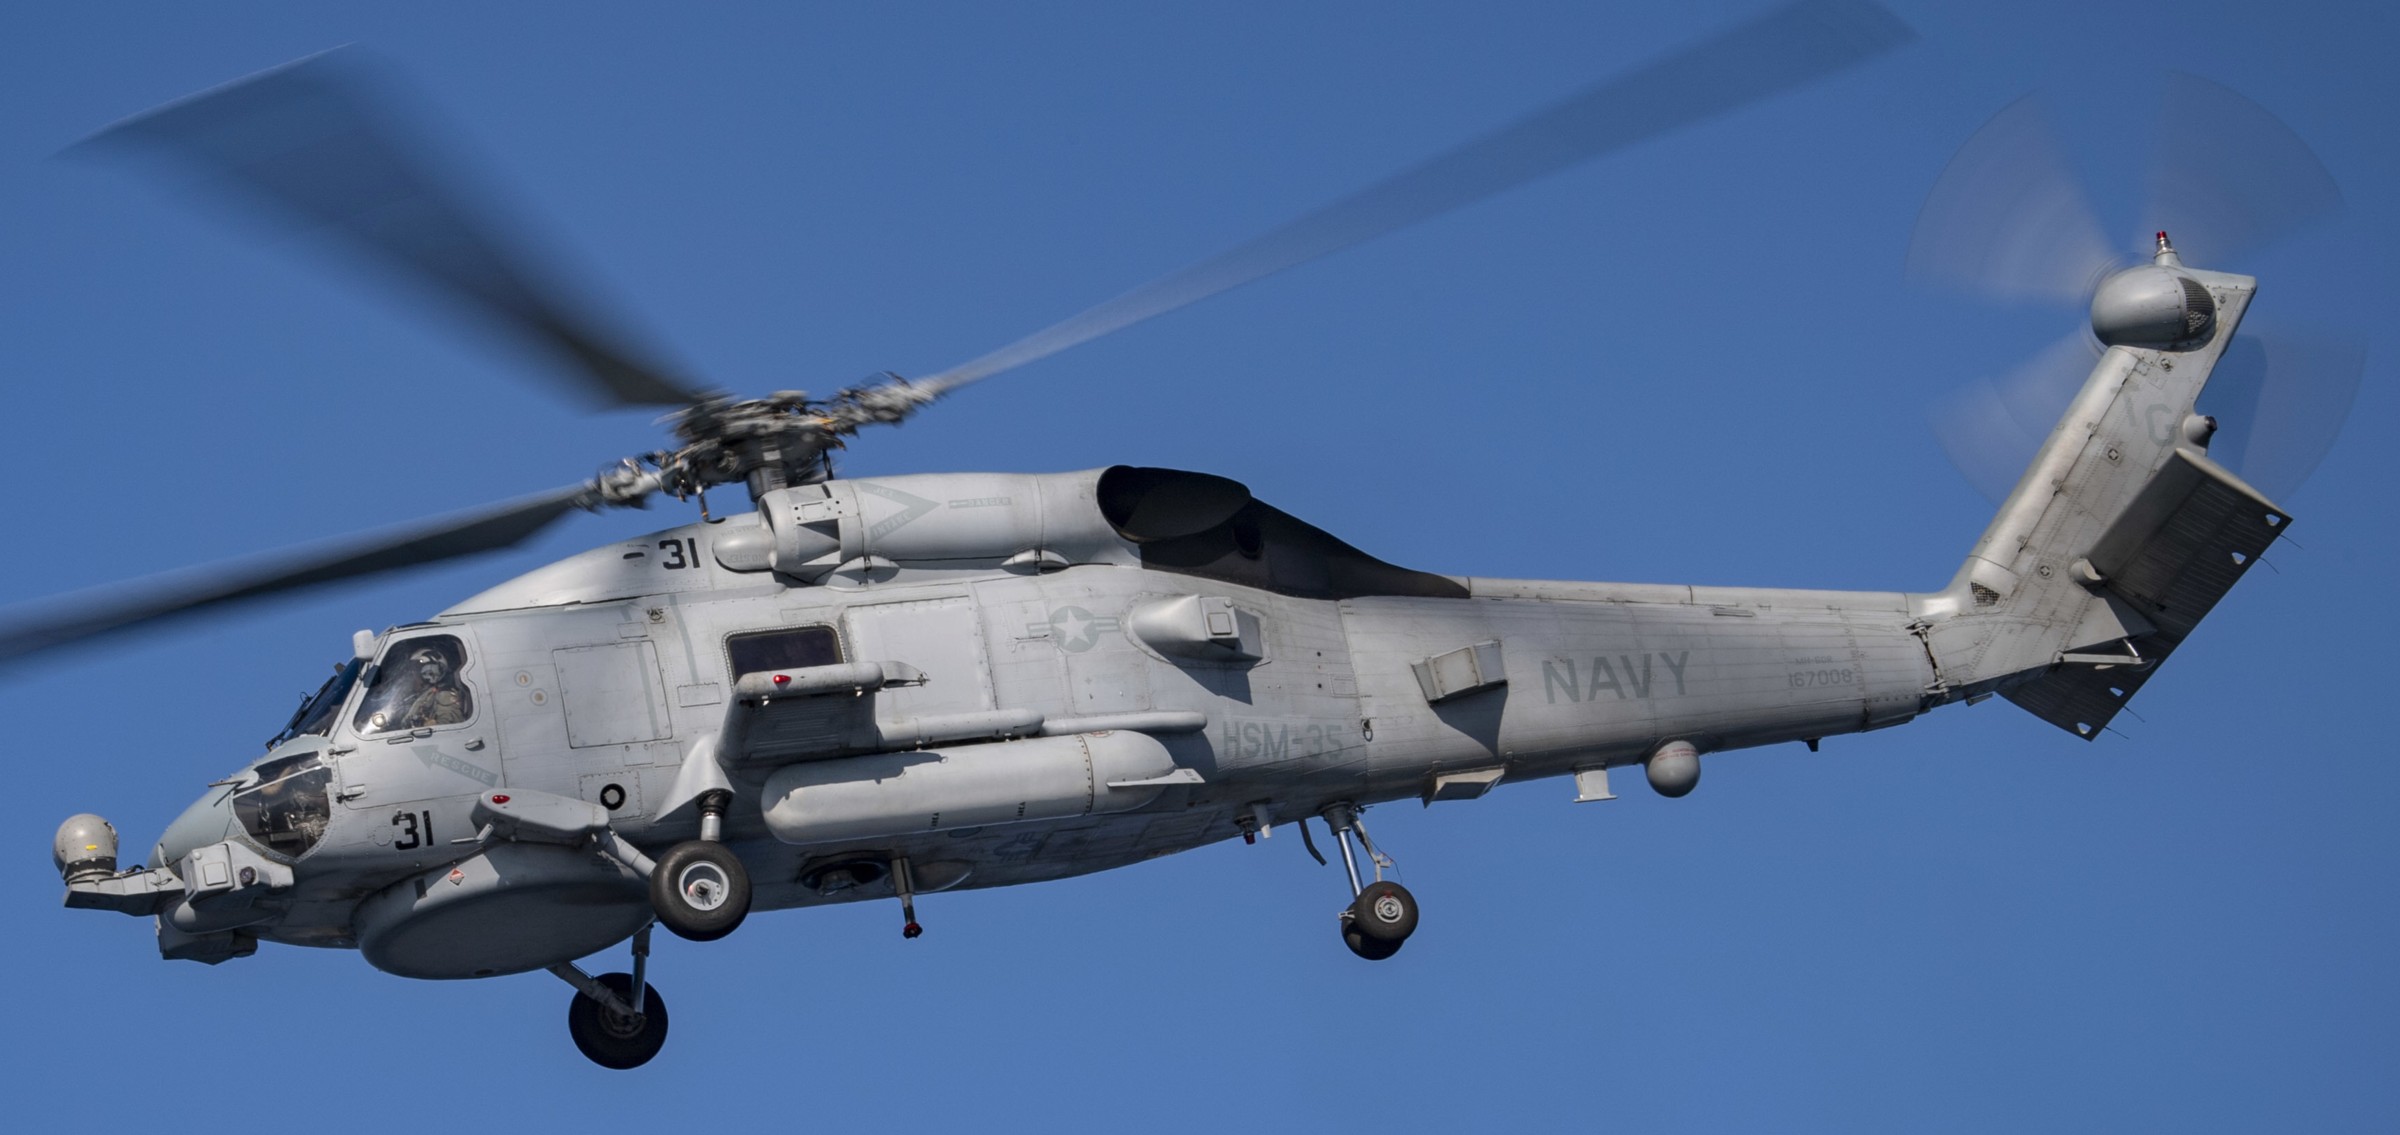 hsm-35 magicians helicopter maritime strike squadron us navy mh-60r seahawk ddg-101 uss gridley 44